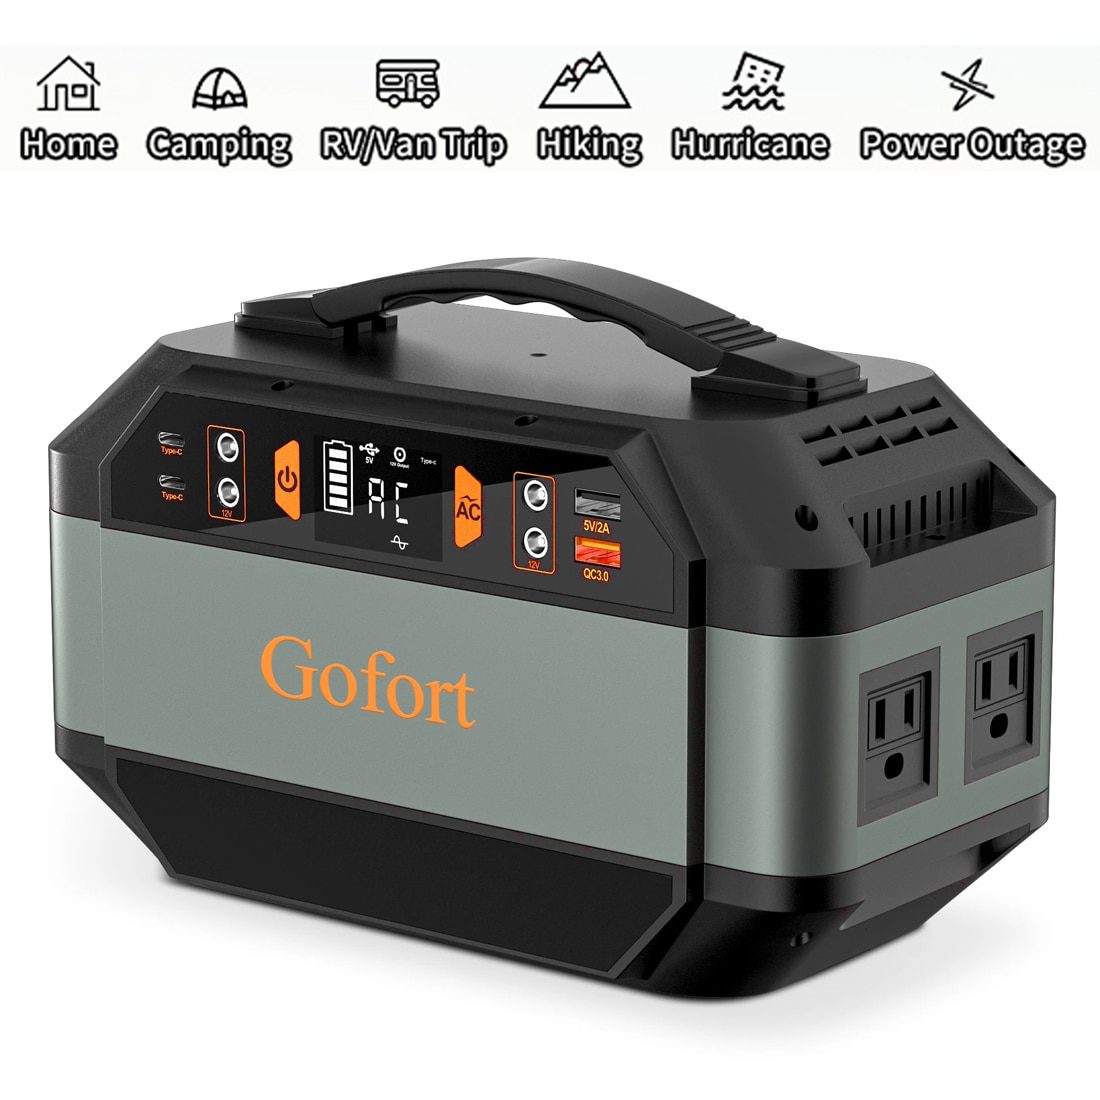 Portable Power Station 330W GoFort Solar Generator 299Wh CPAP Battery Pack Emergency Power Supply